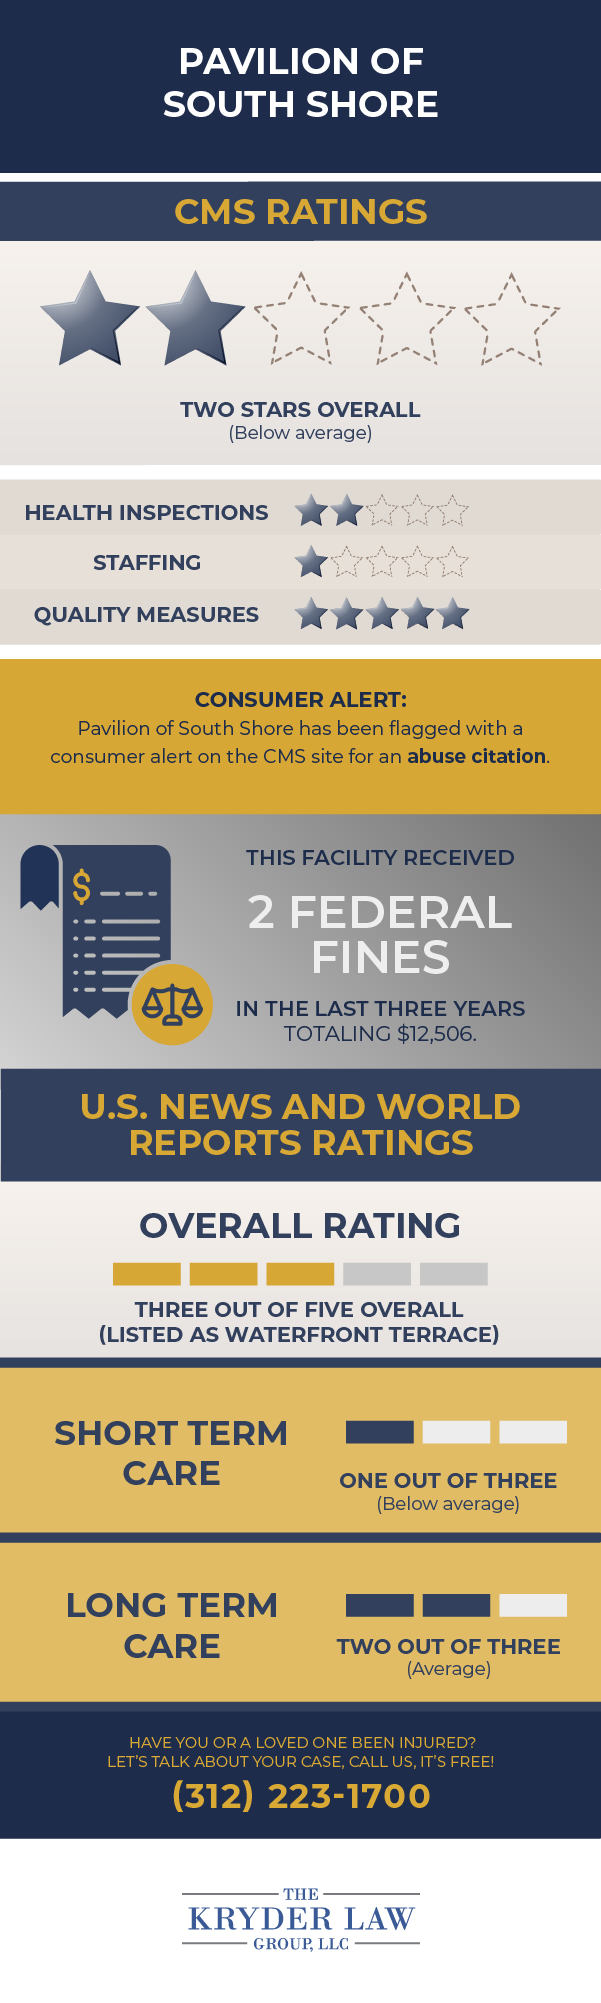 Pavilion of South Shore CMS Ratings and U.S. News and World Reports Ratings